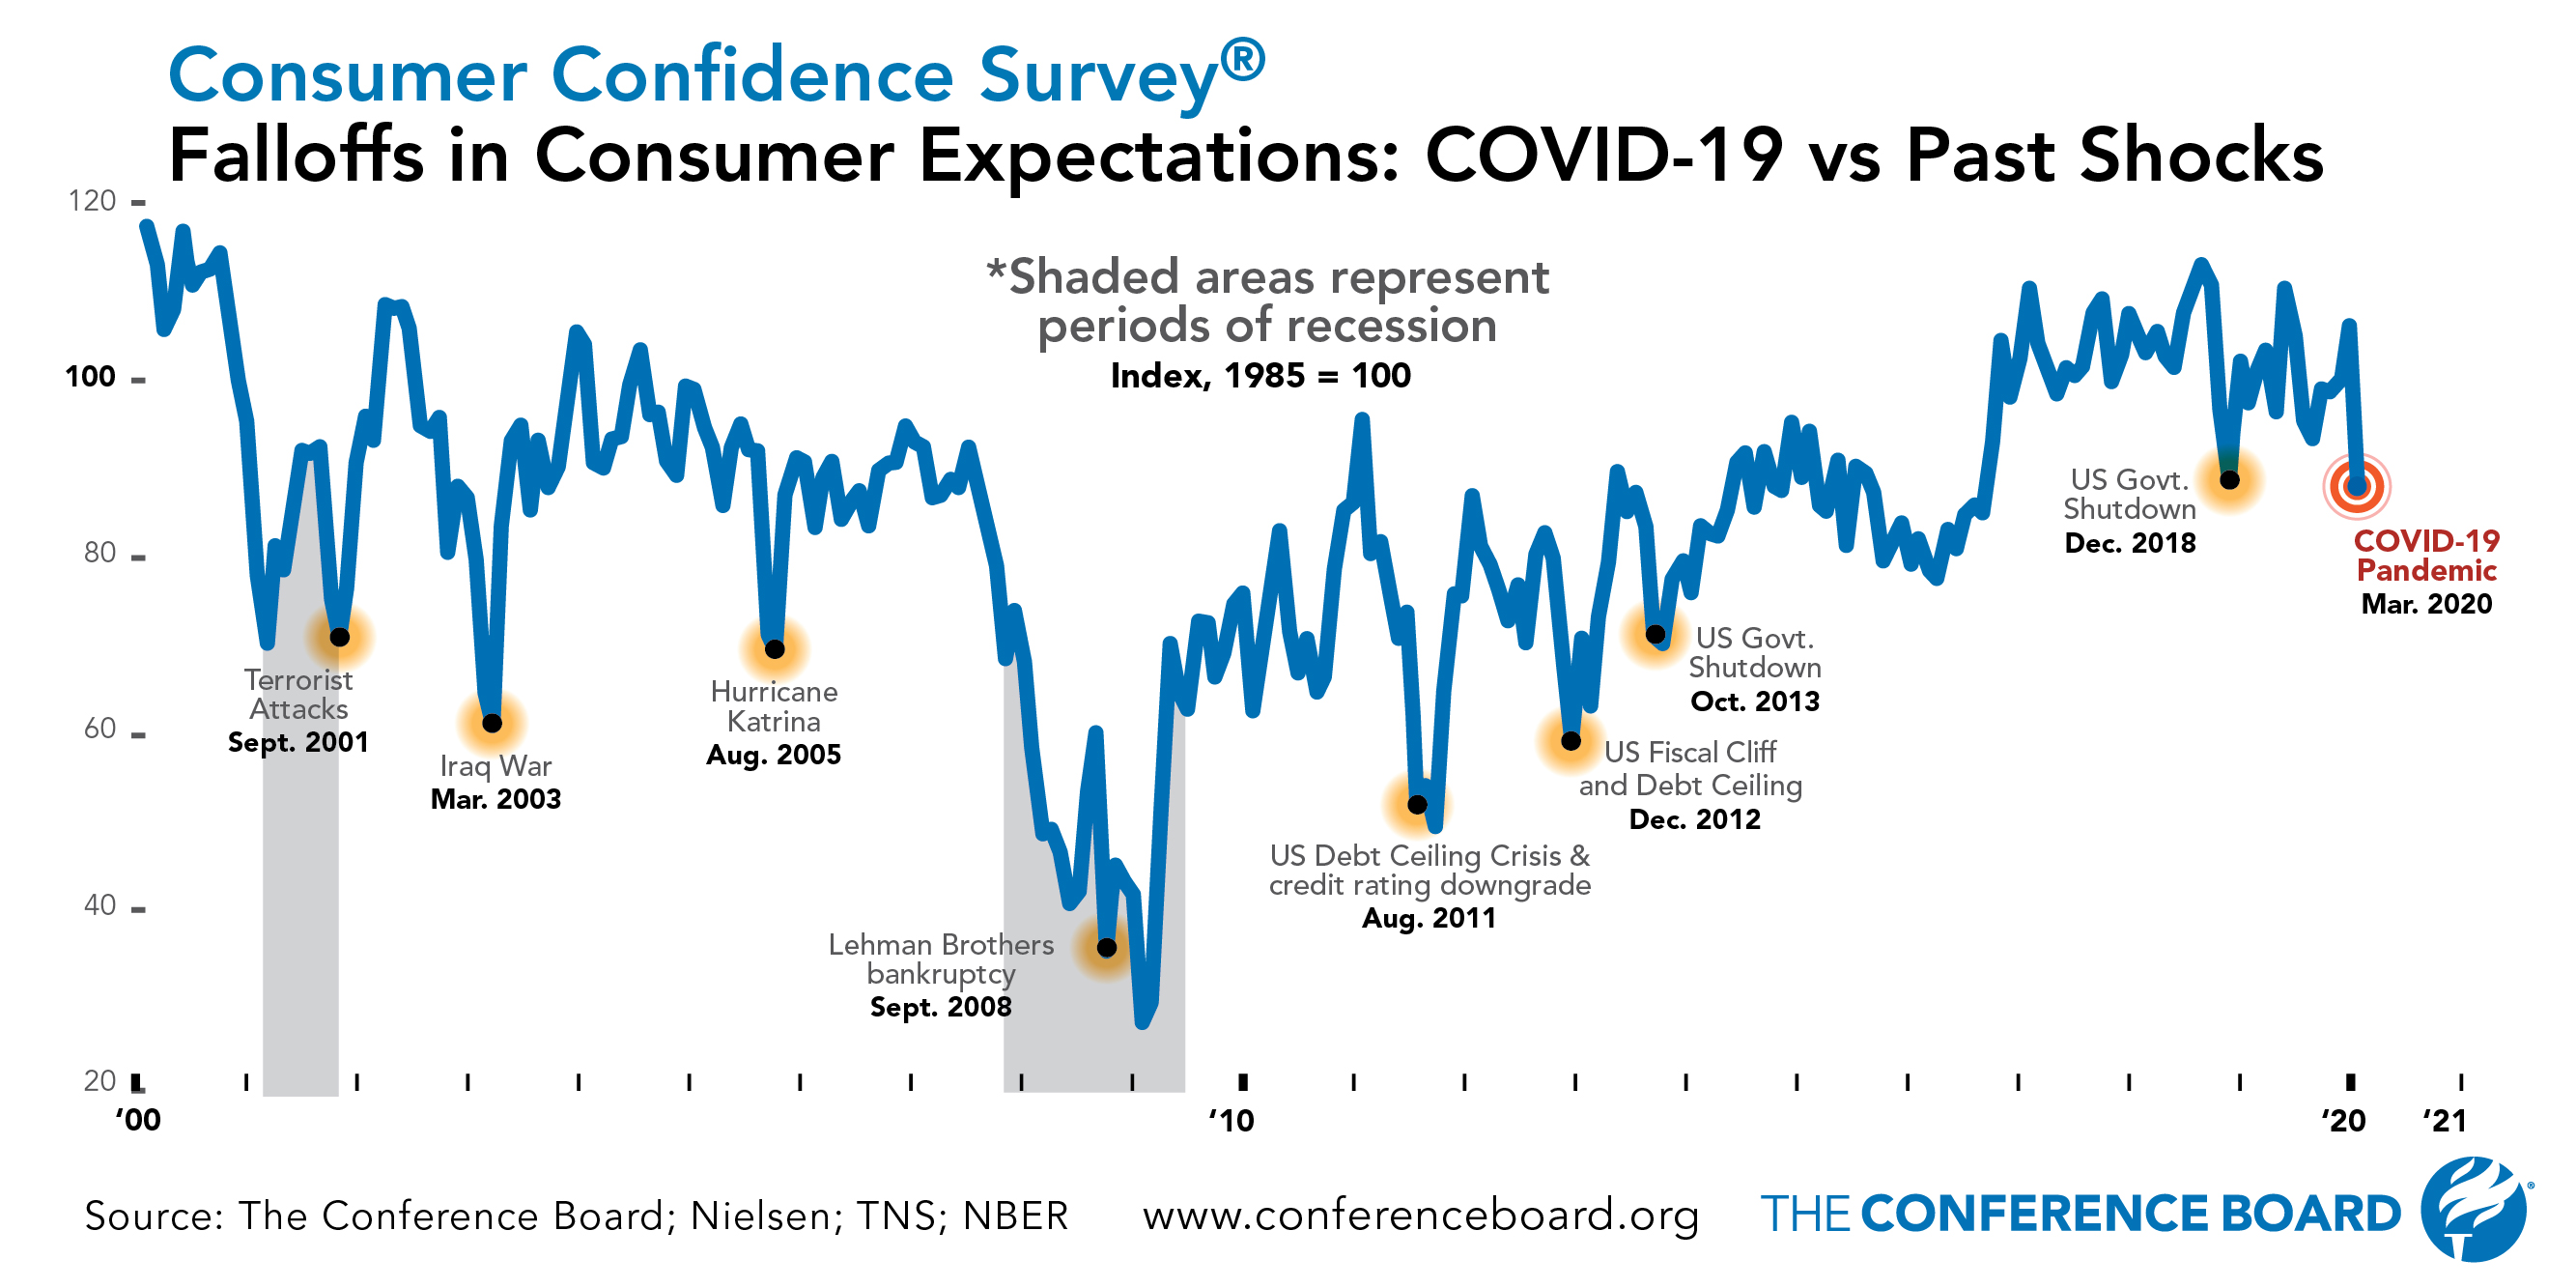 COVID-19 spurs drop in consumer expectations that will likely worsen